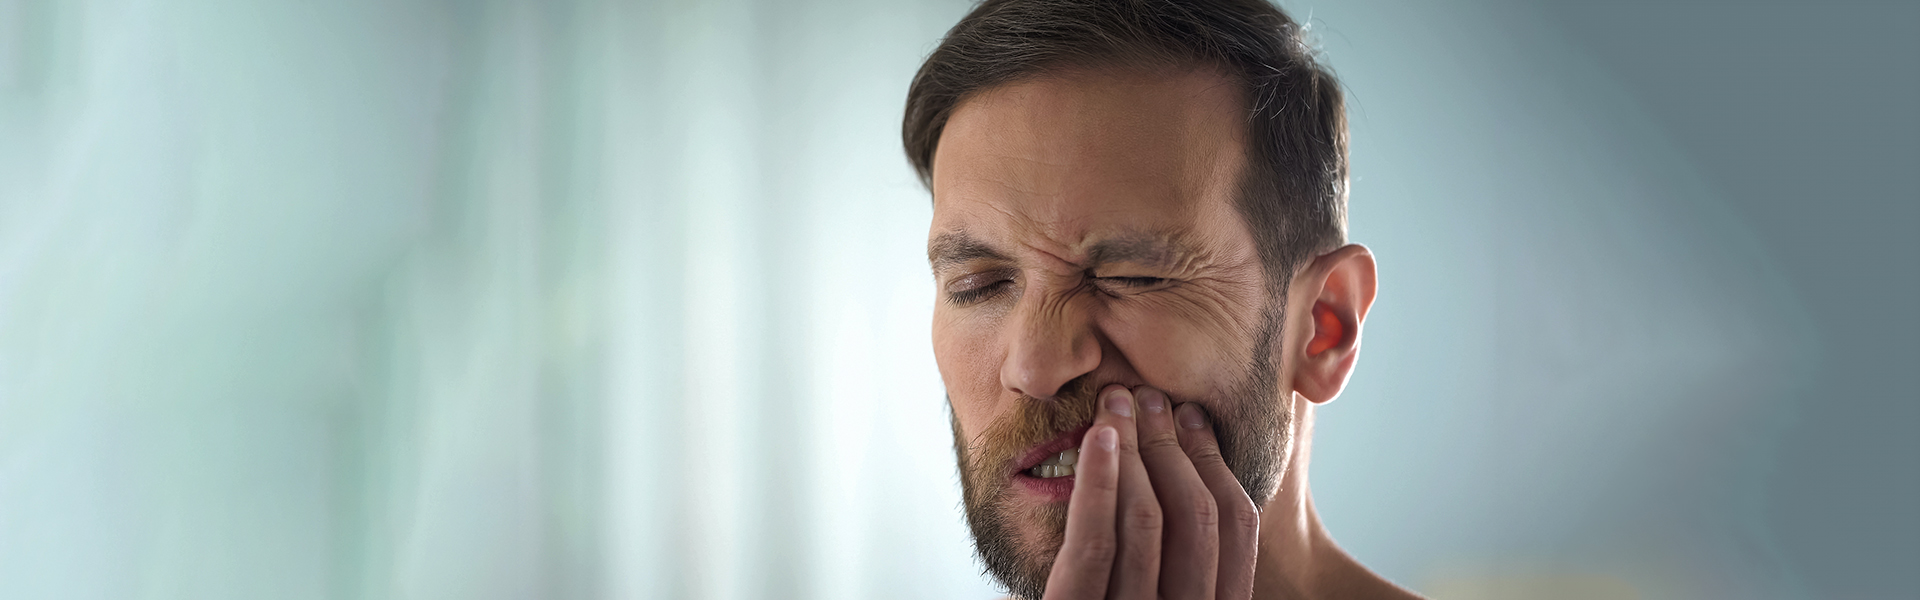 Emergency Toothache Treatment during the Covid-19 Pandemic